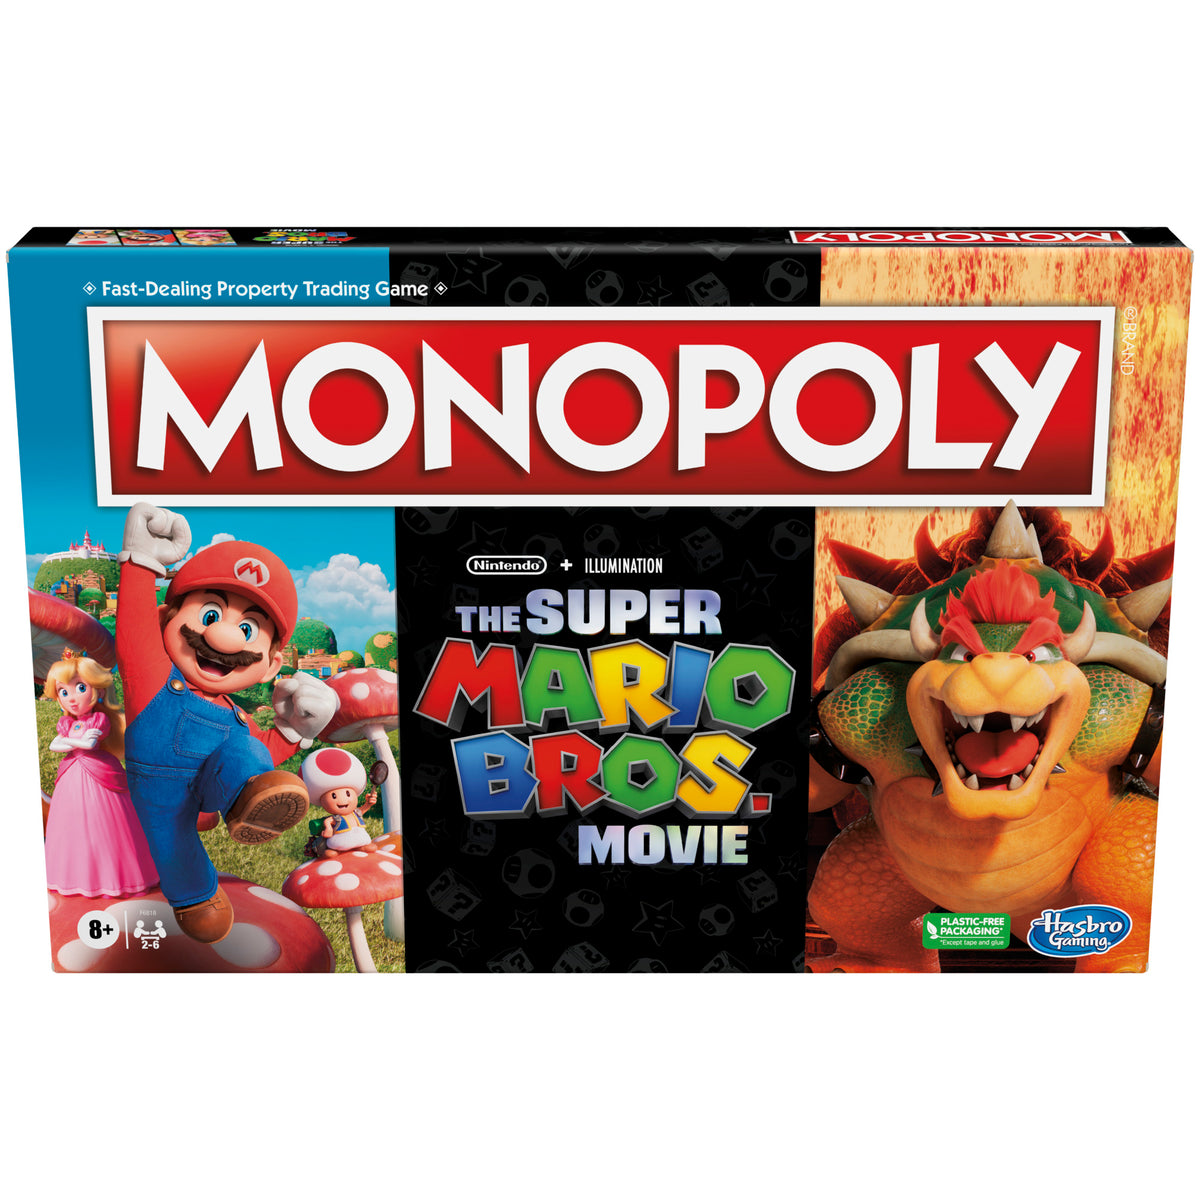 The Game of Life: Super Mario Edition Board Game for Kids Ages 8 and Up